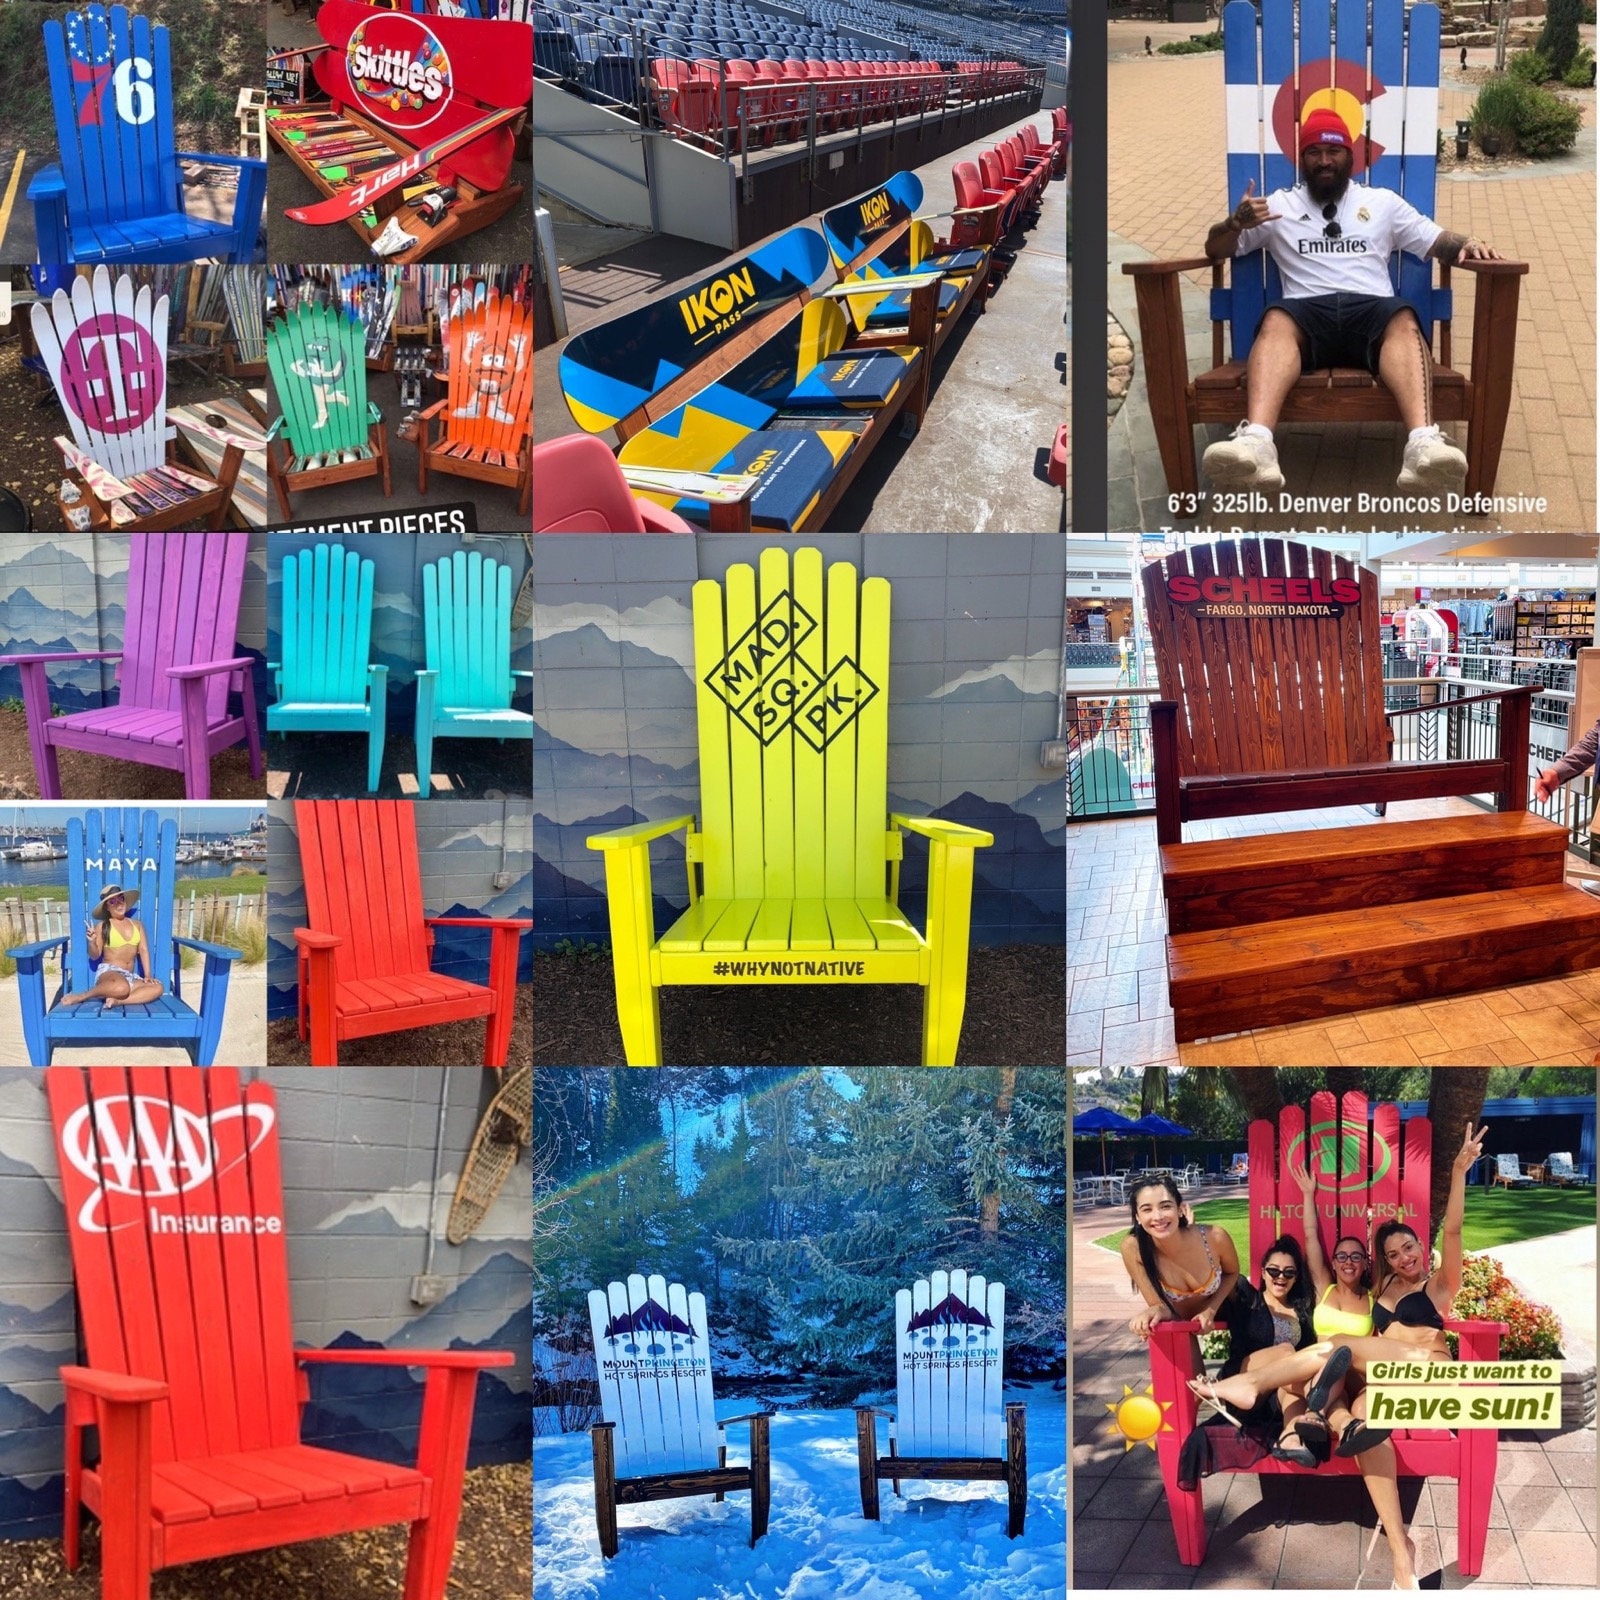 On the public art patrol: giant chairs